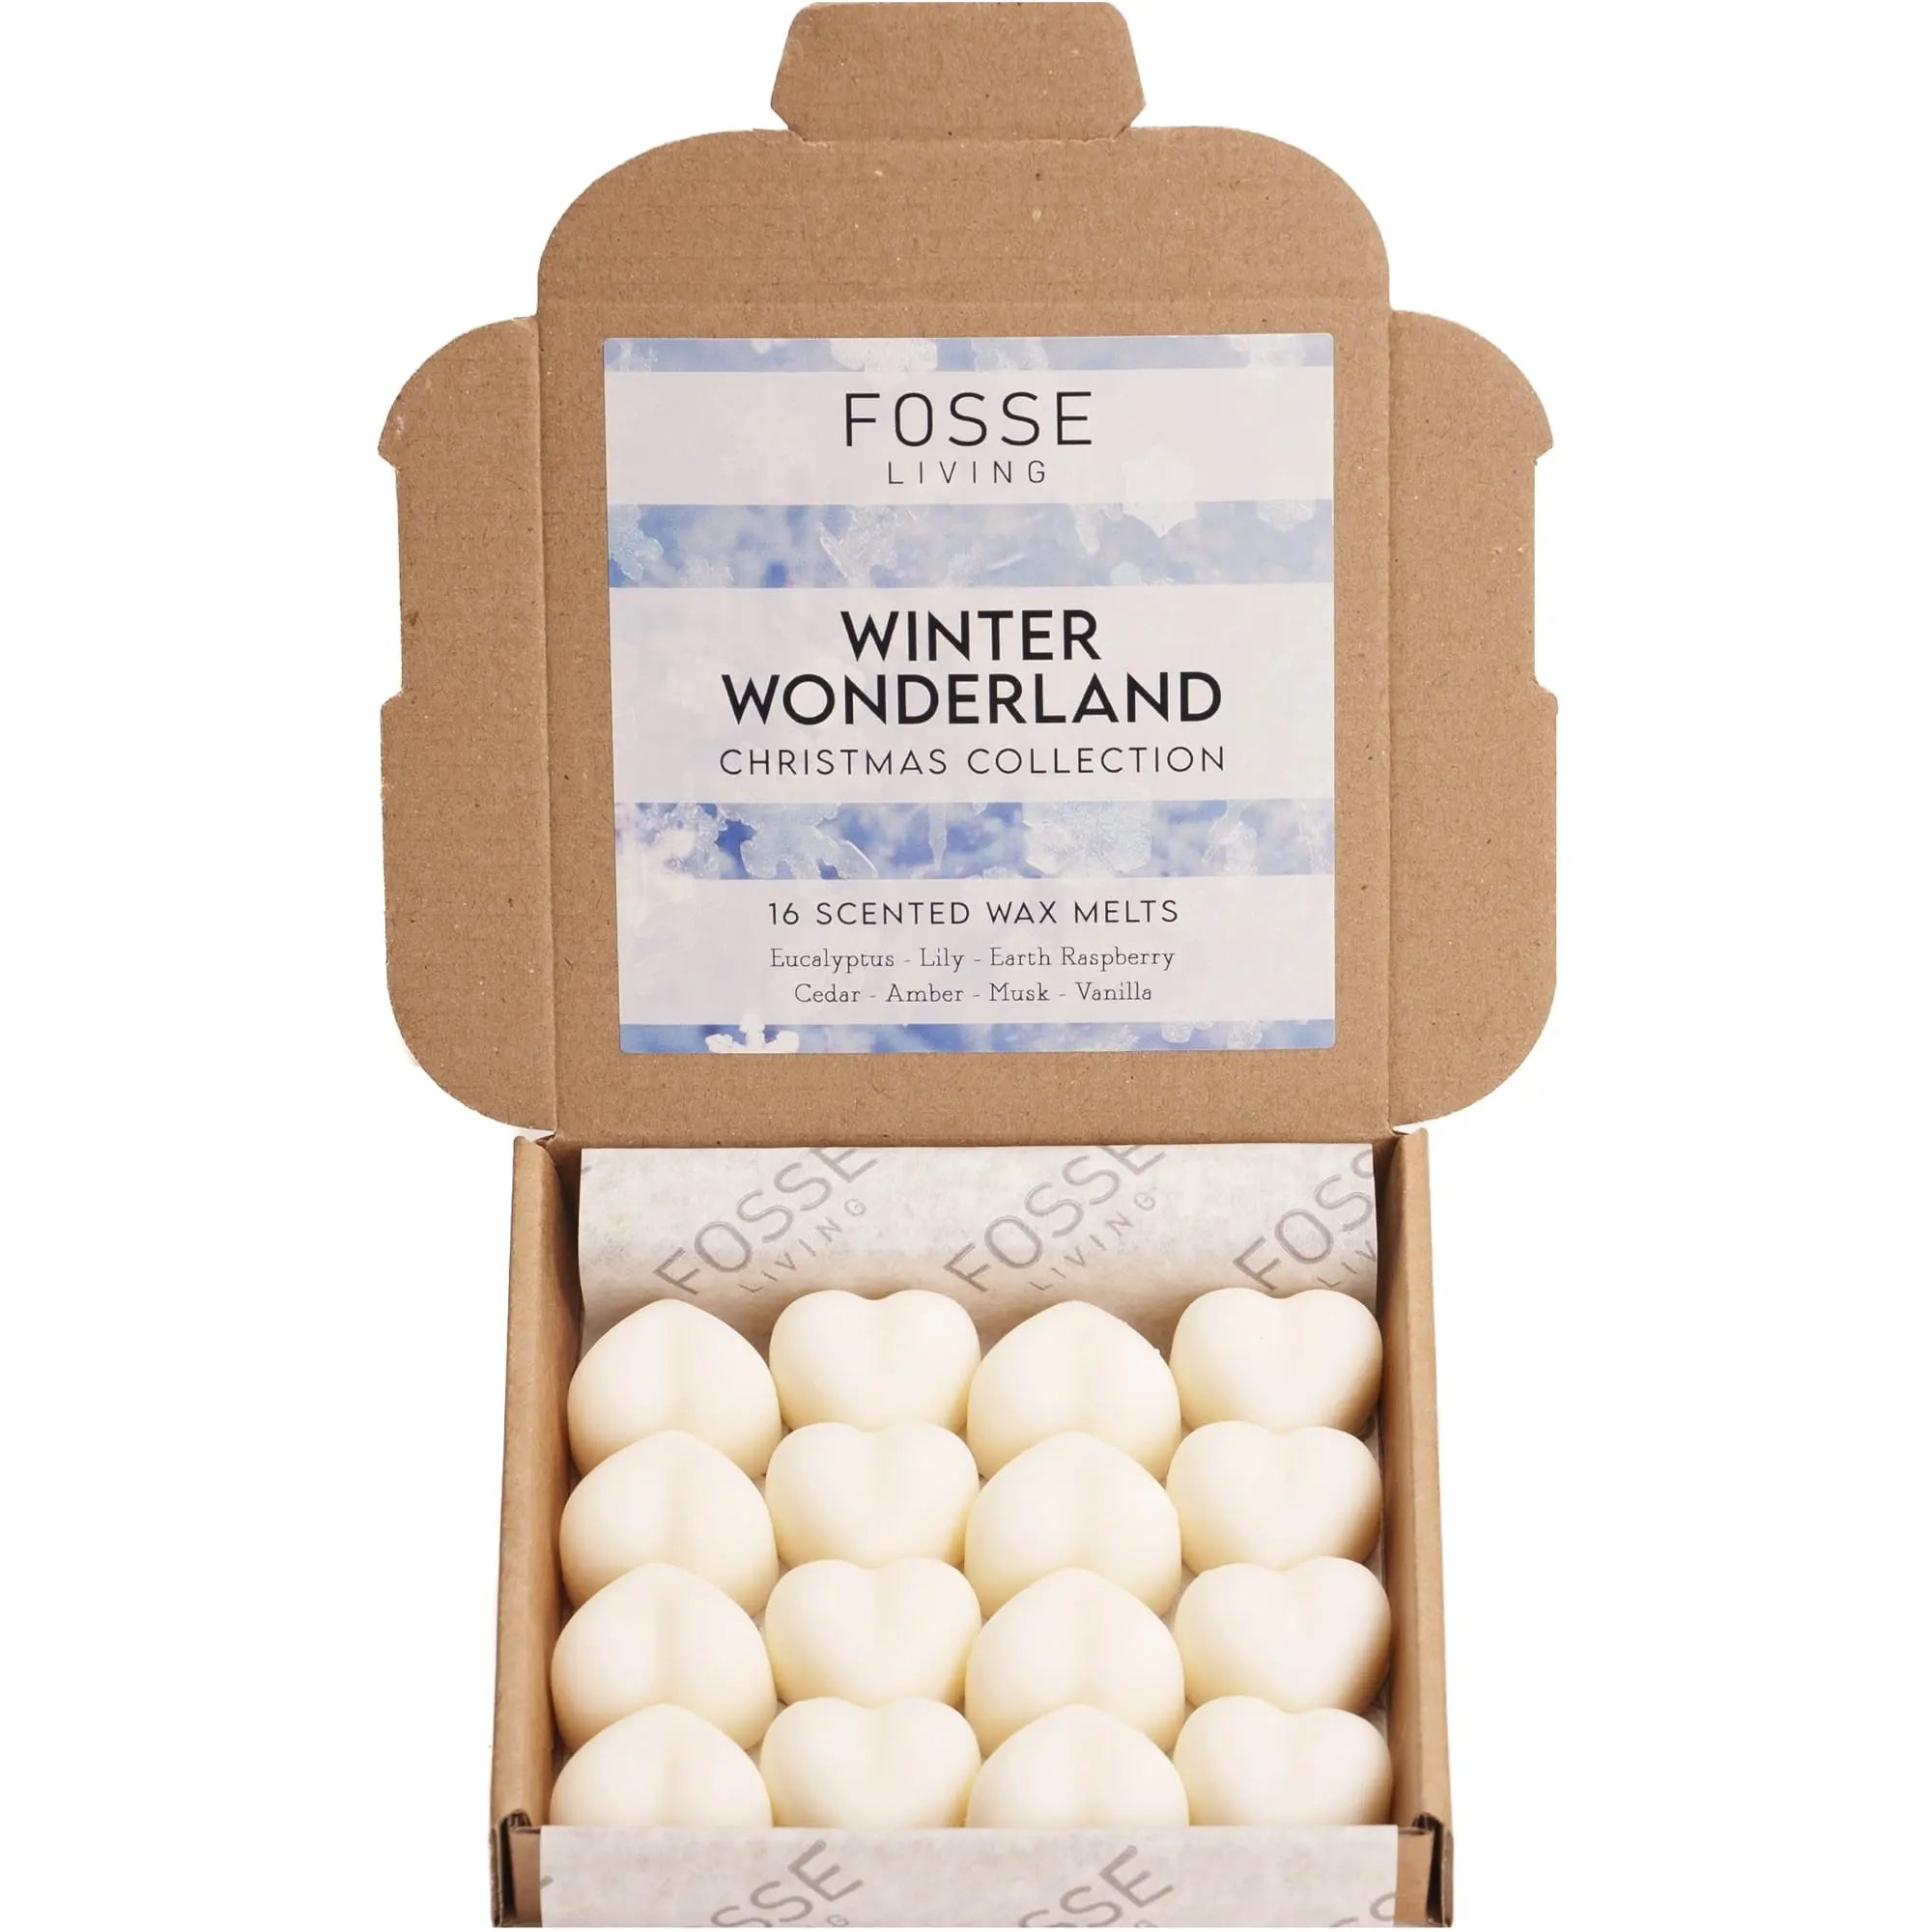 Wax Melts Winter Wonderland Scented christmas wax melts by fosse living